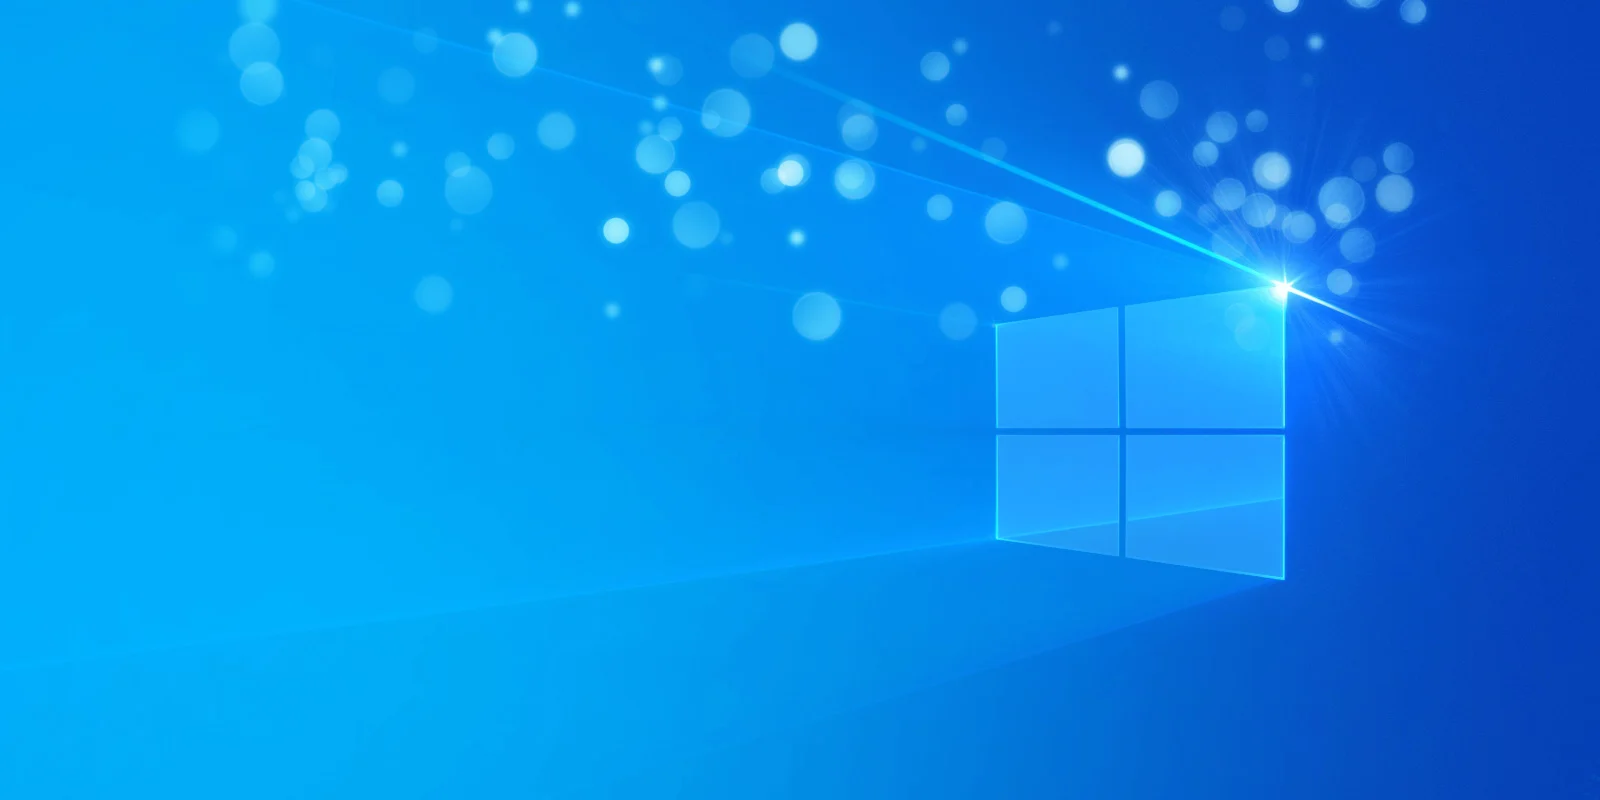 How to Boot Into Safe Mode Windows 10?